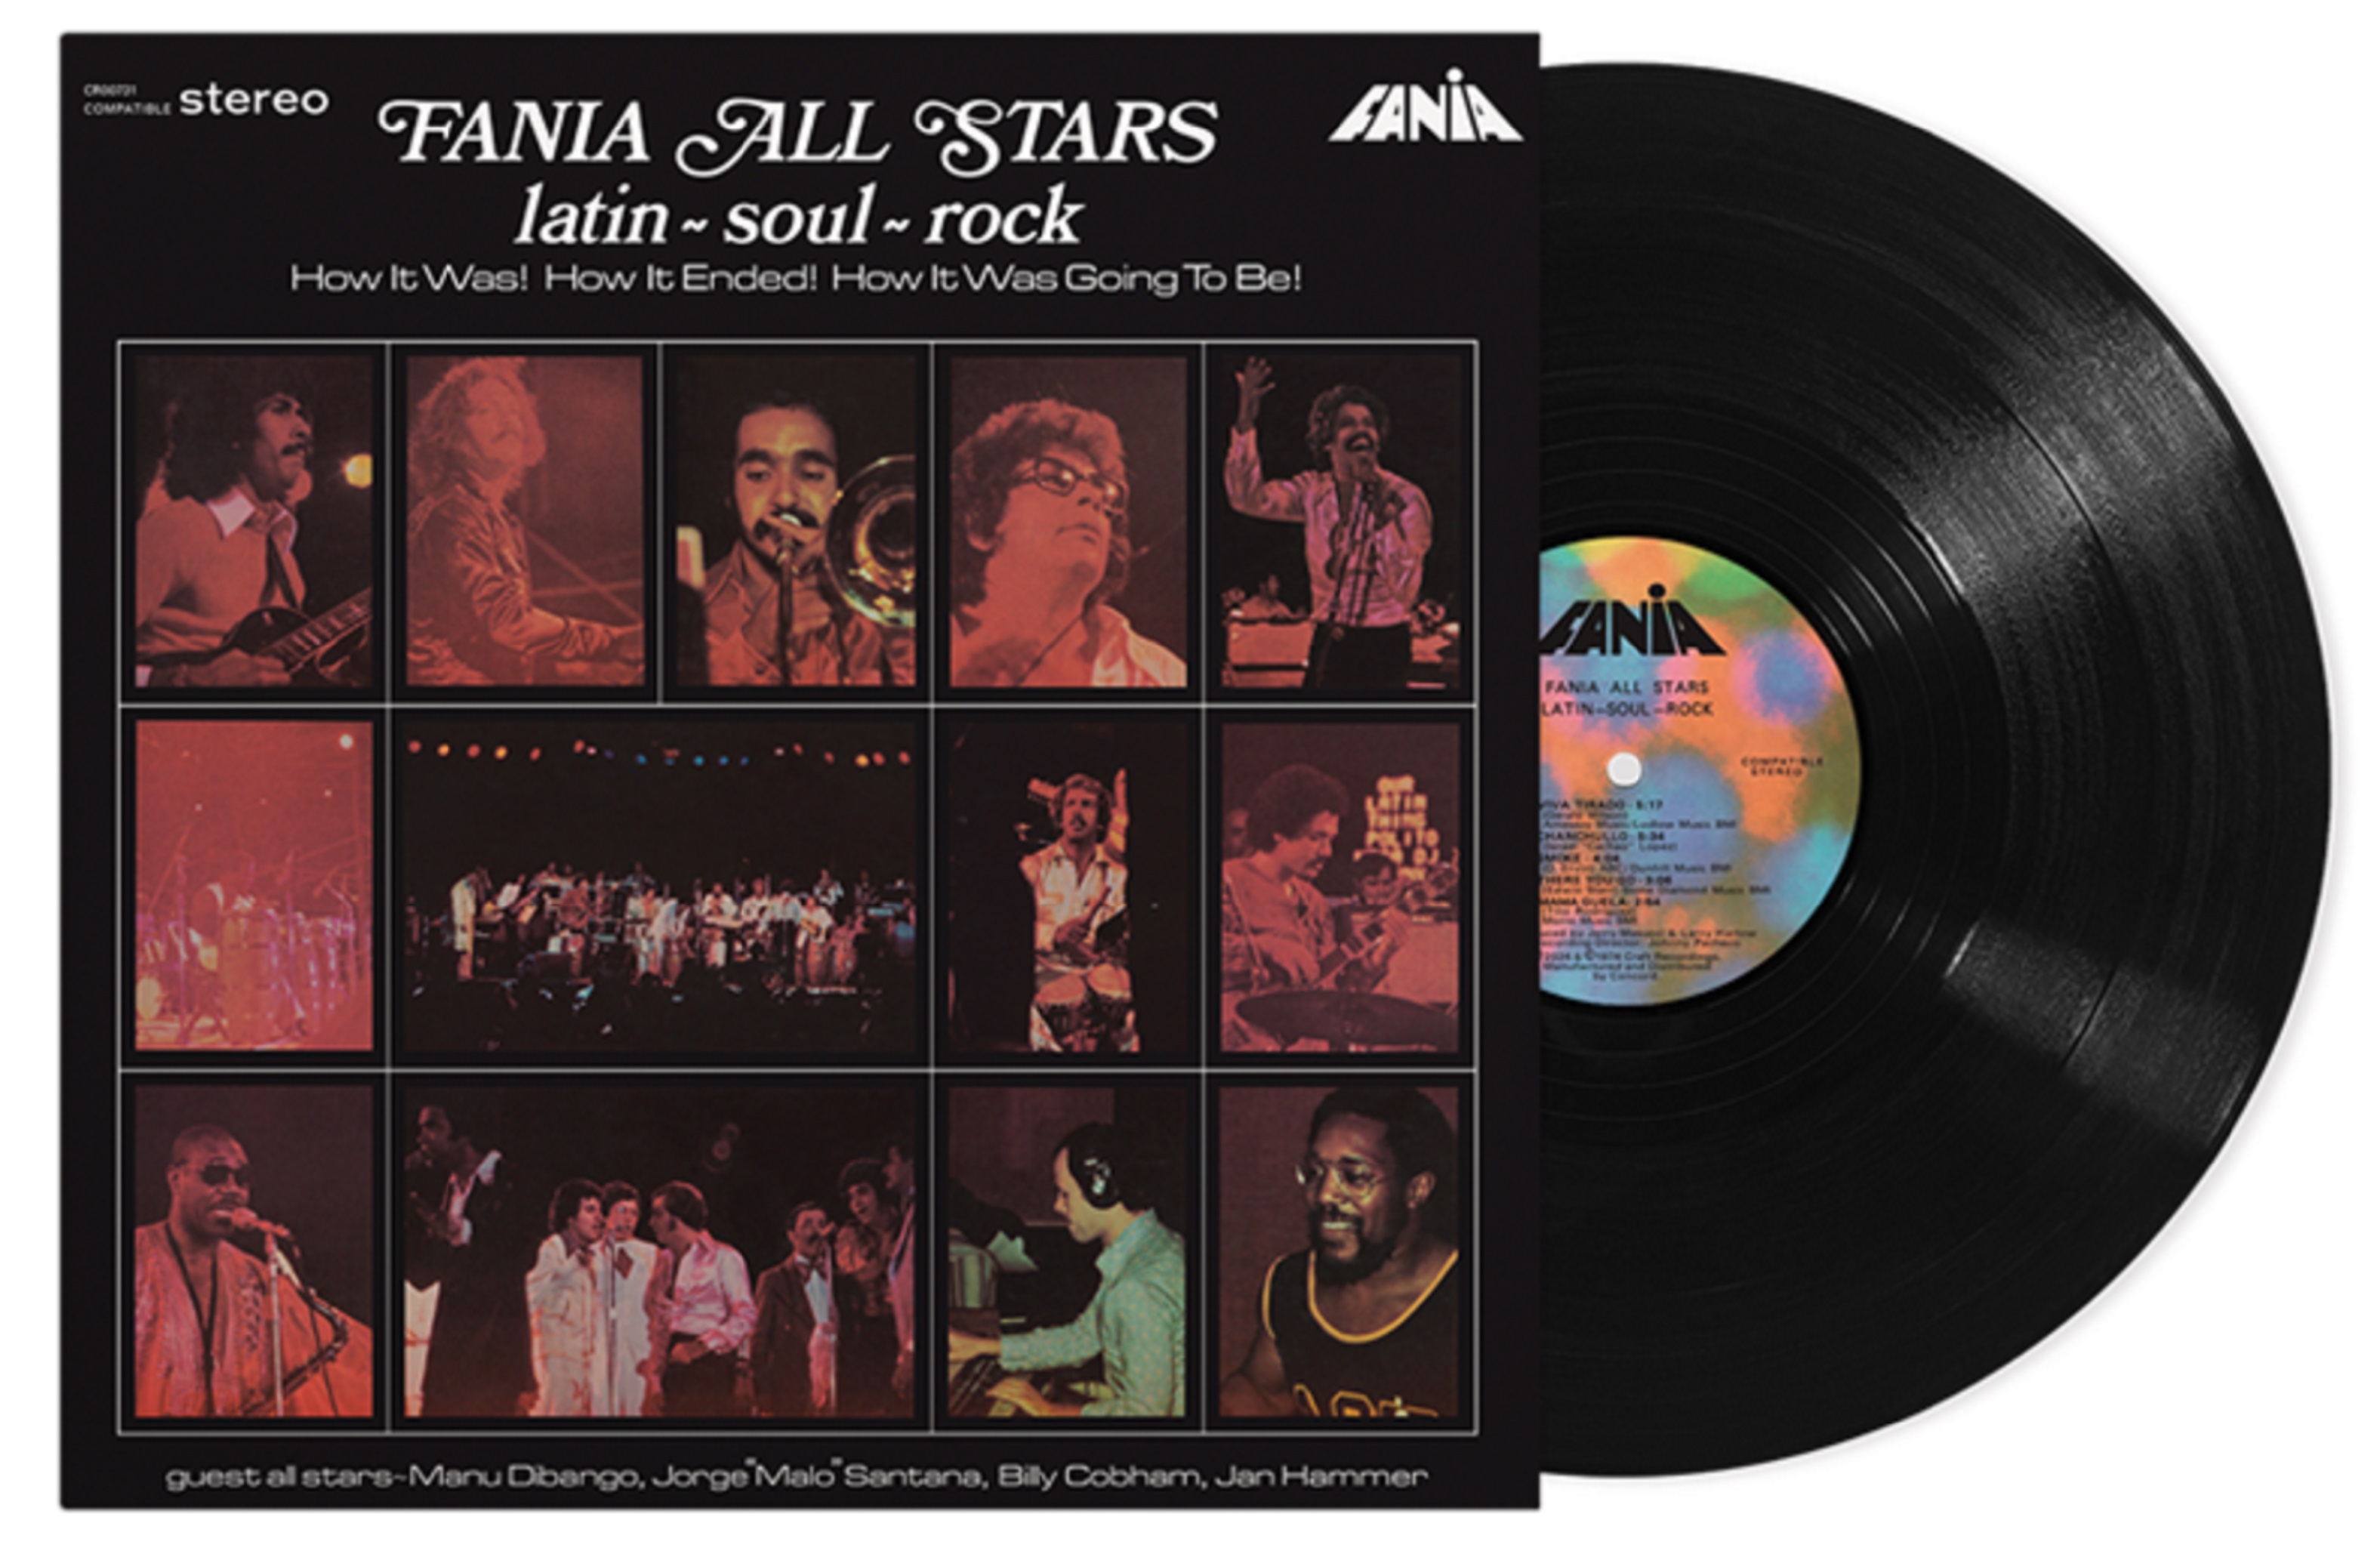 Fania All Star’s long-out-of-print classic ‘Latin-Soul-Rock’ returns to vinyl for 50th anniv.